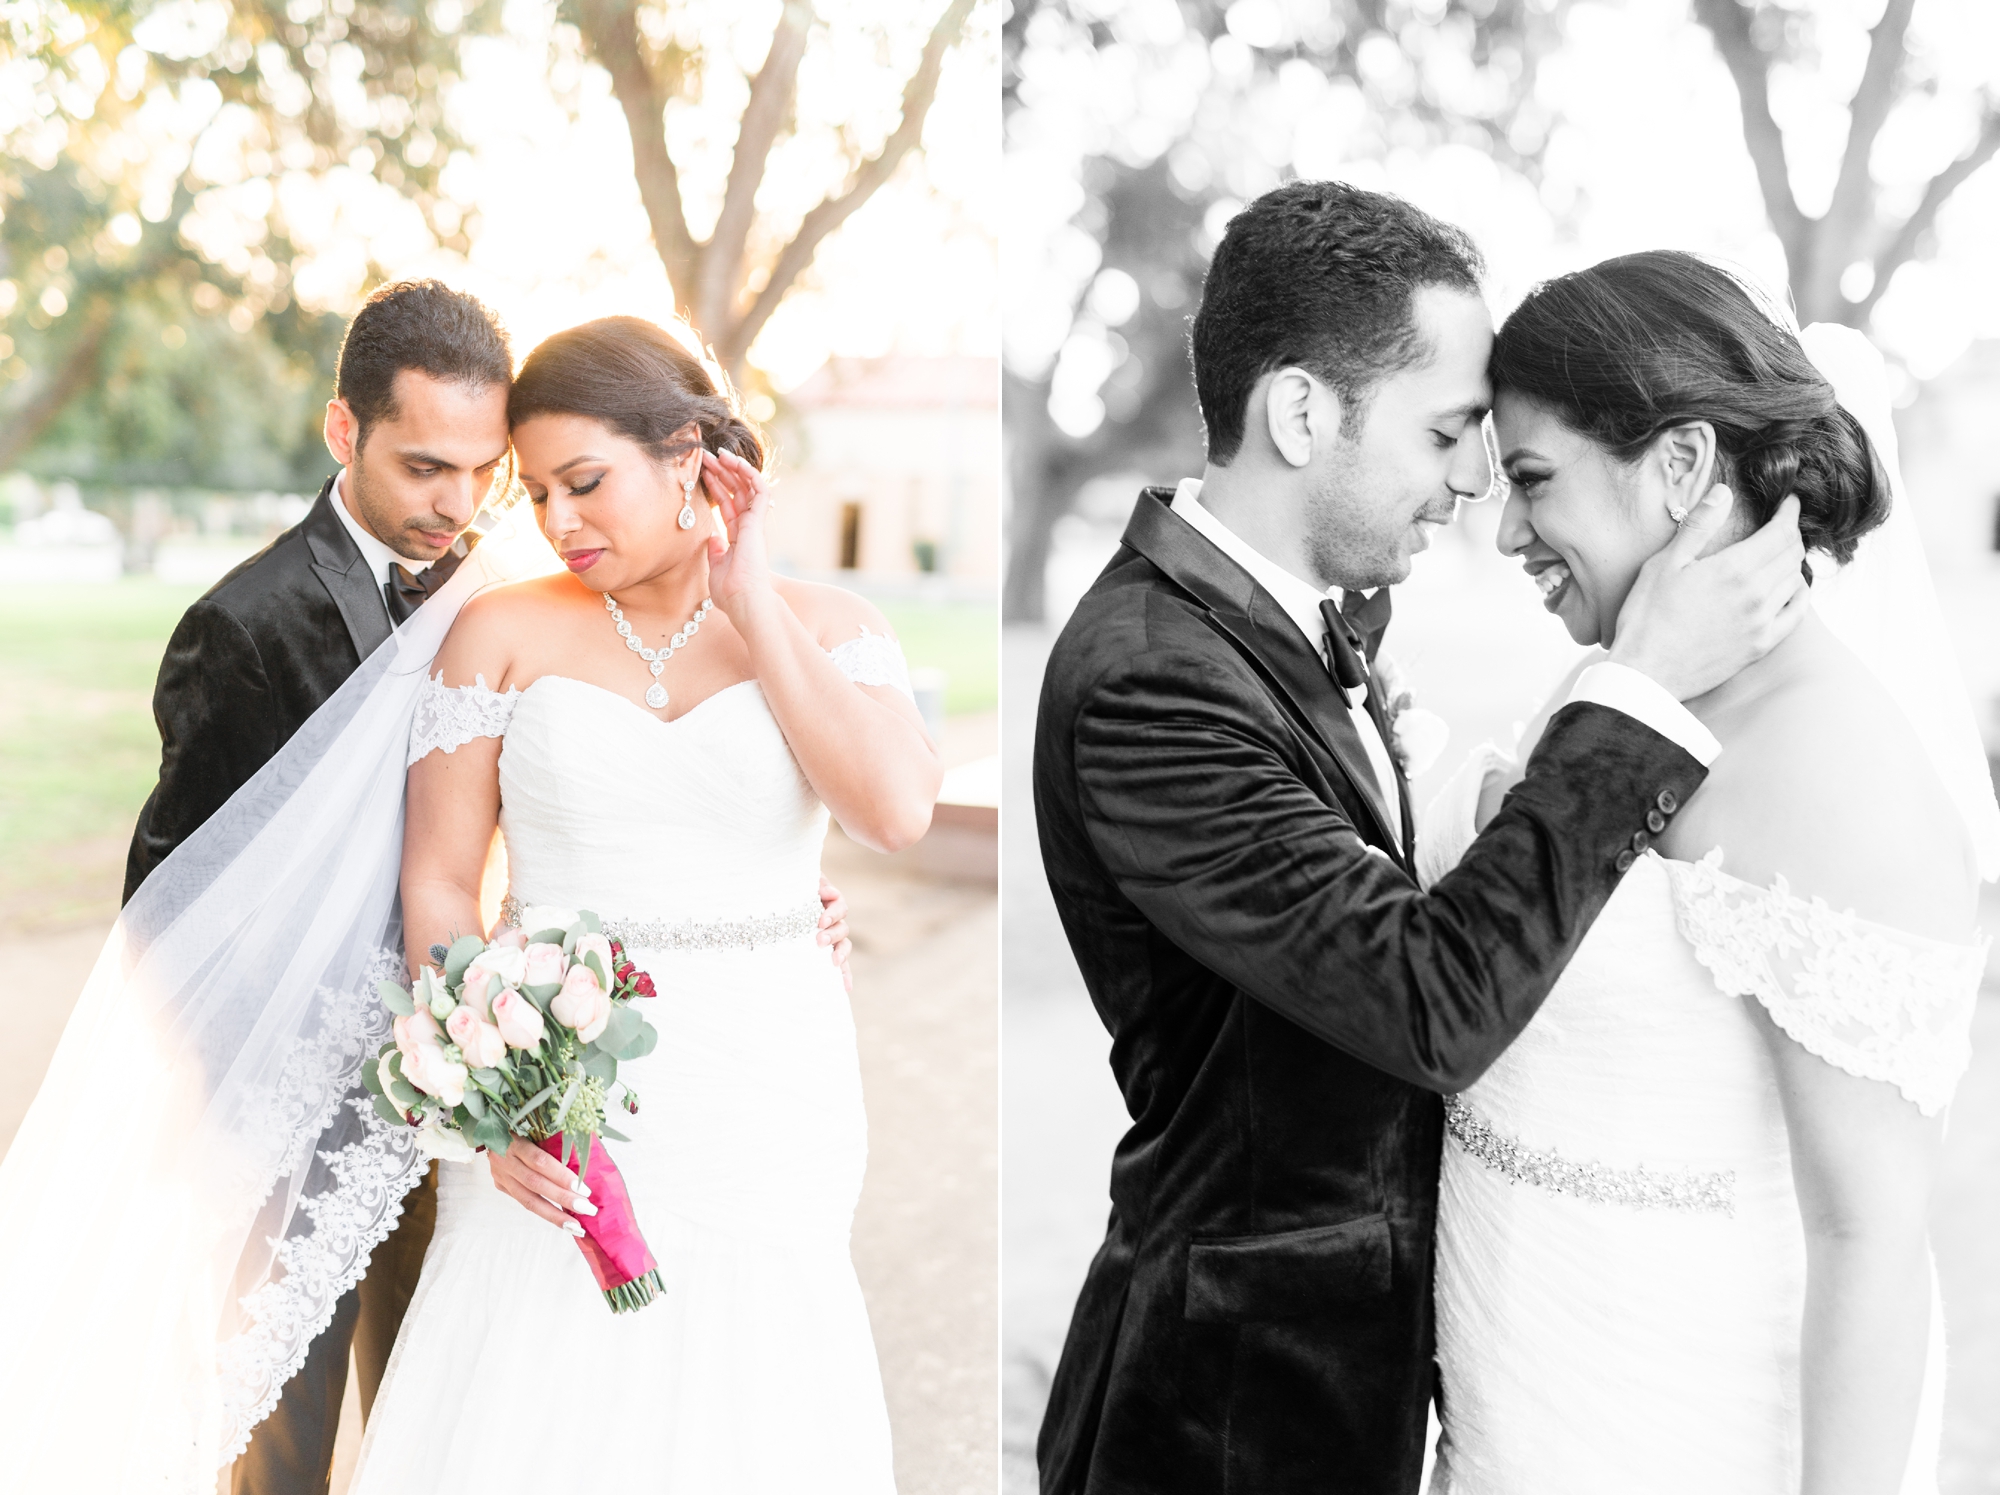 Romantic bride and groom poses